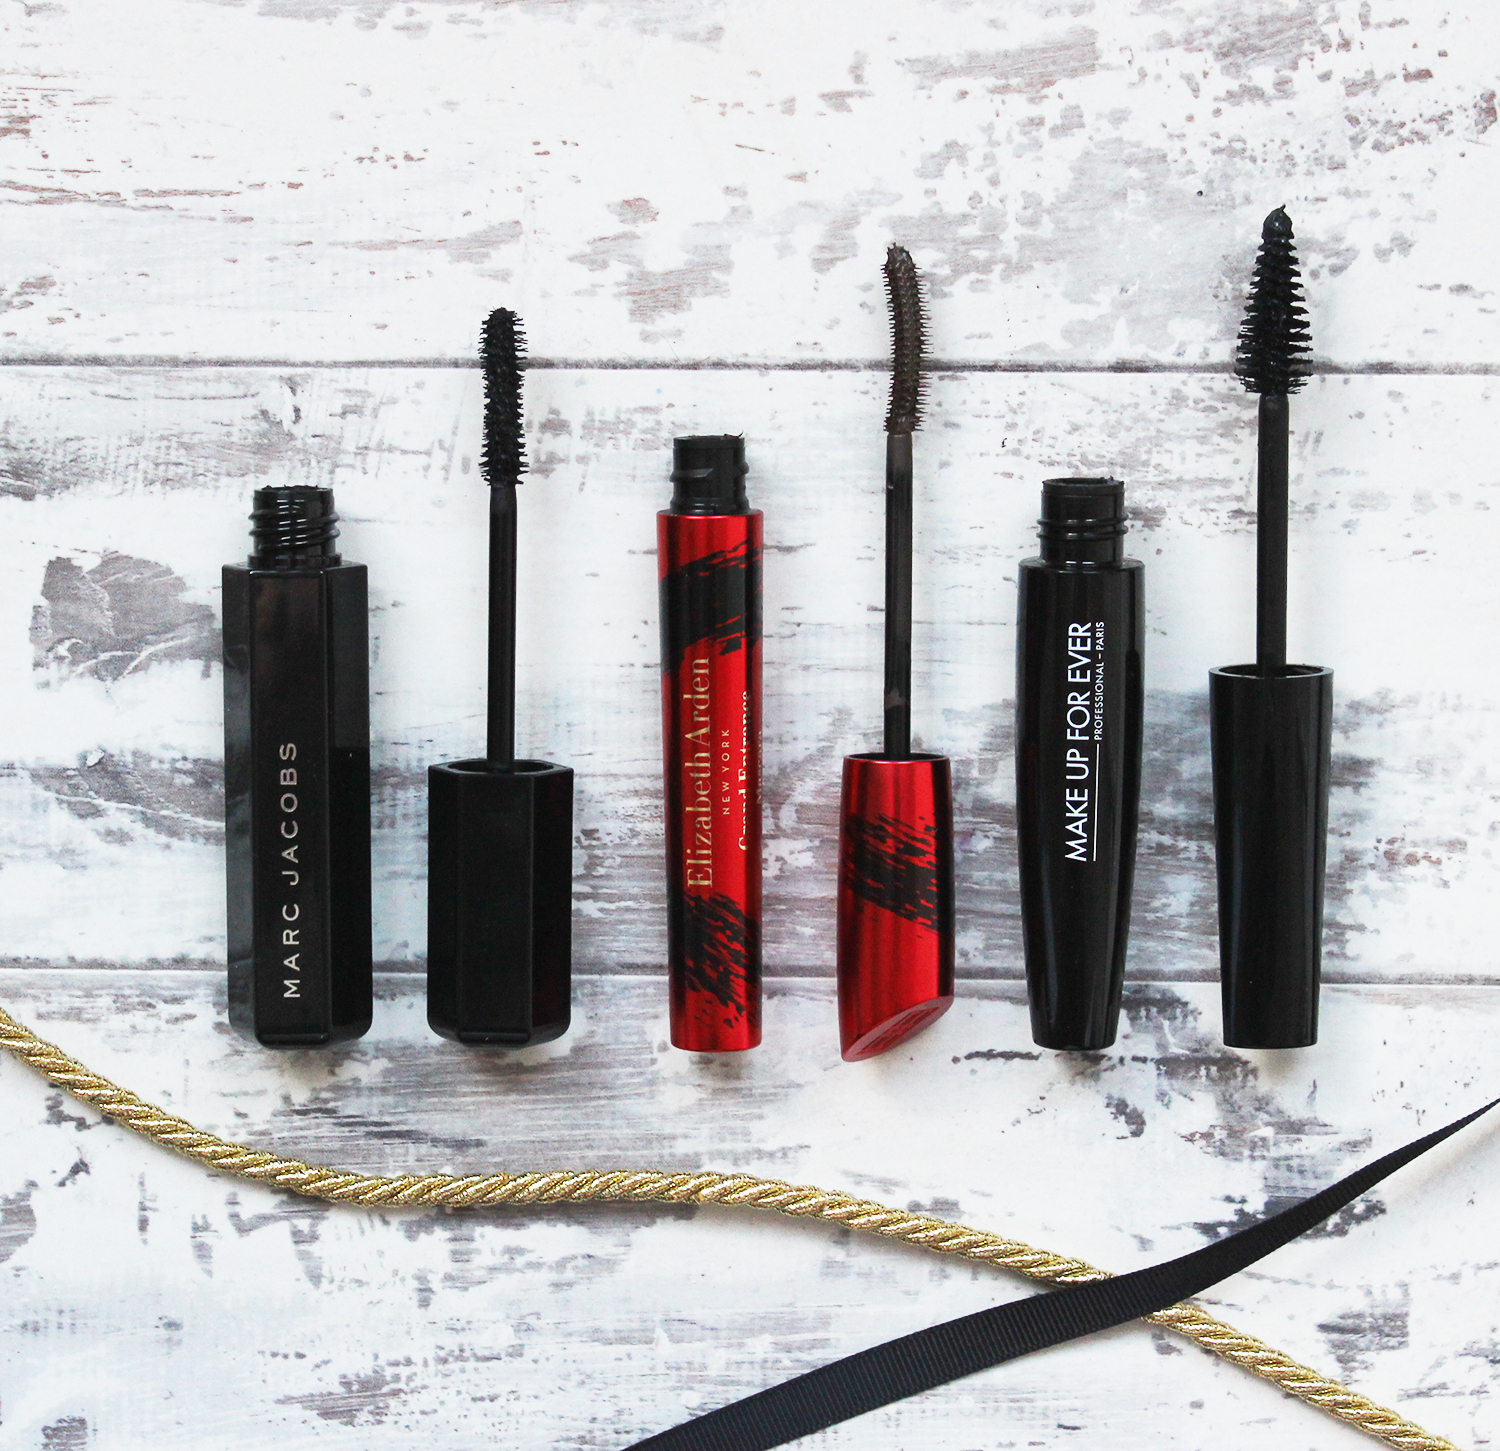 3 must-have high end mascara launches from Elizabeth Arden, Marc Jacobs and Make Up for Ever